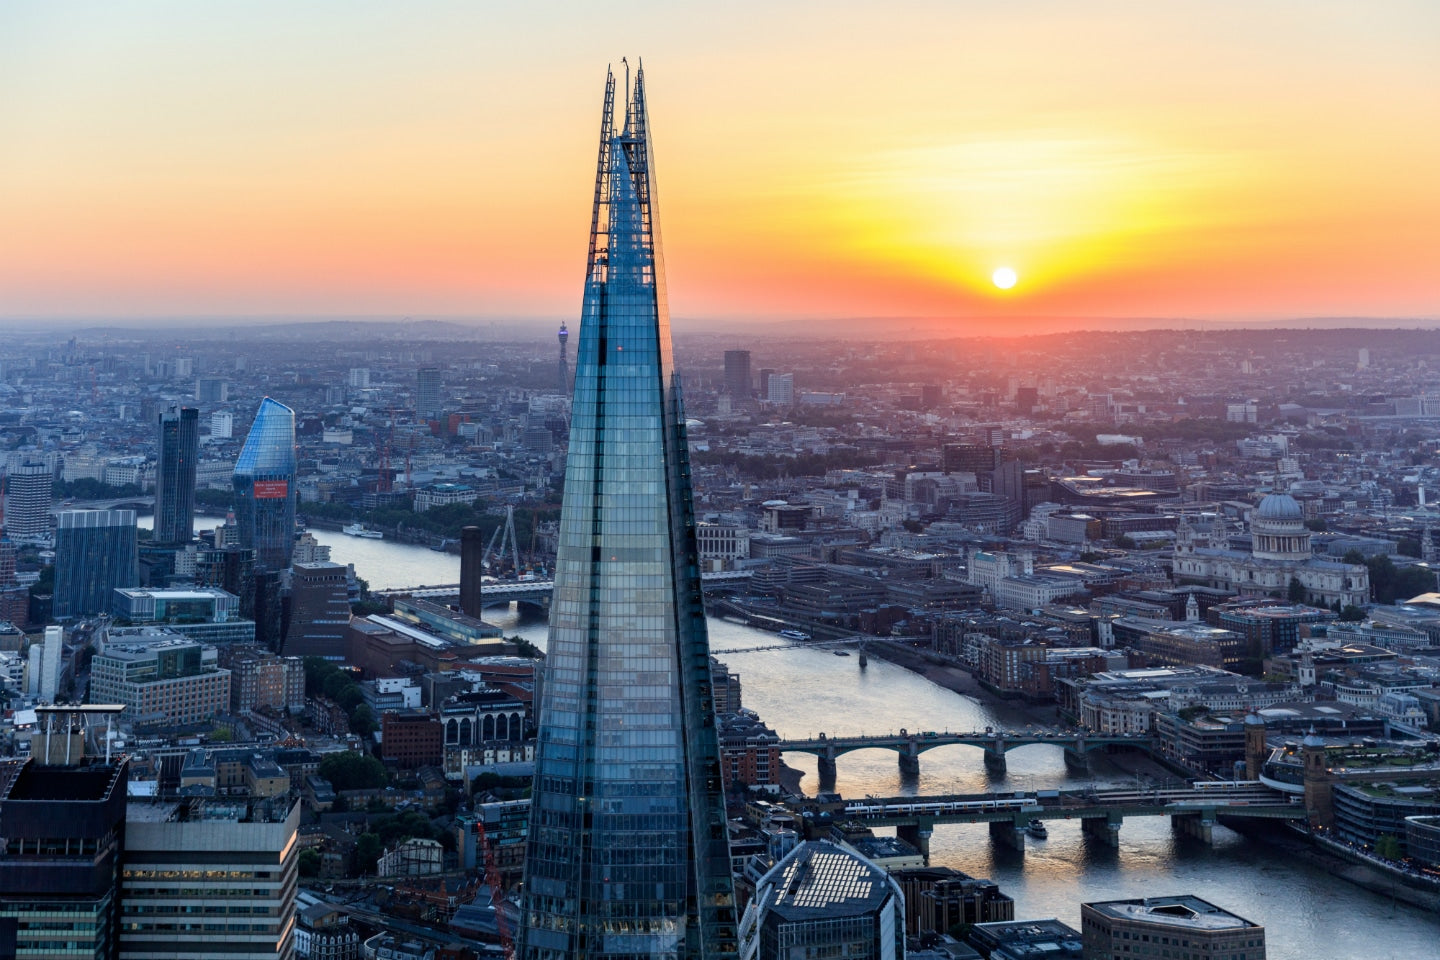 1nt: 4* London stay, breakfast & View from The Shard with Champagne: £268 for two